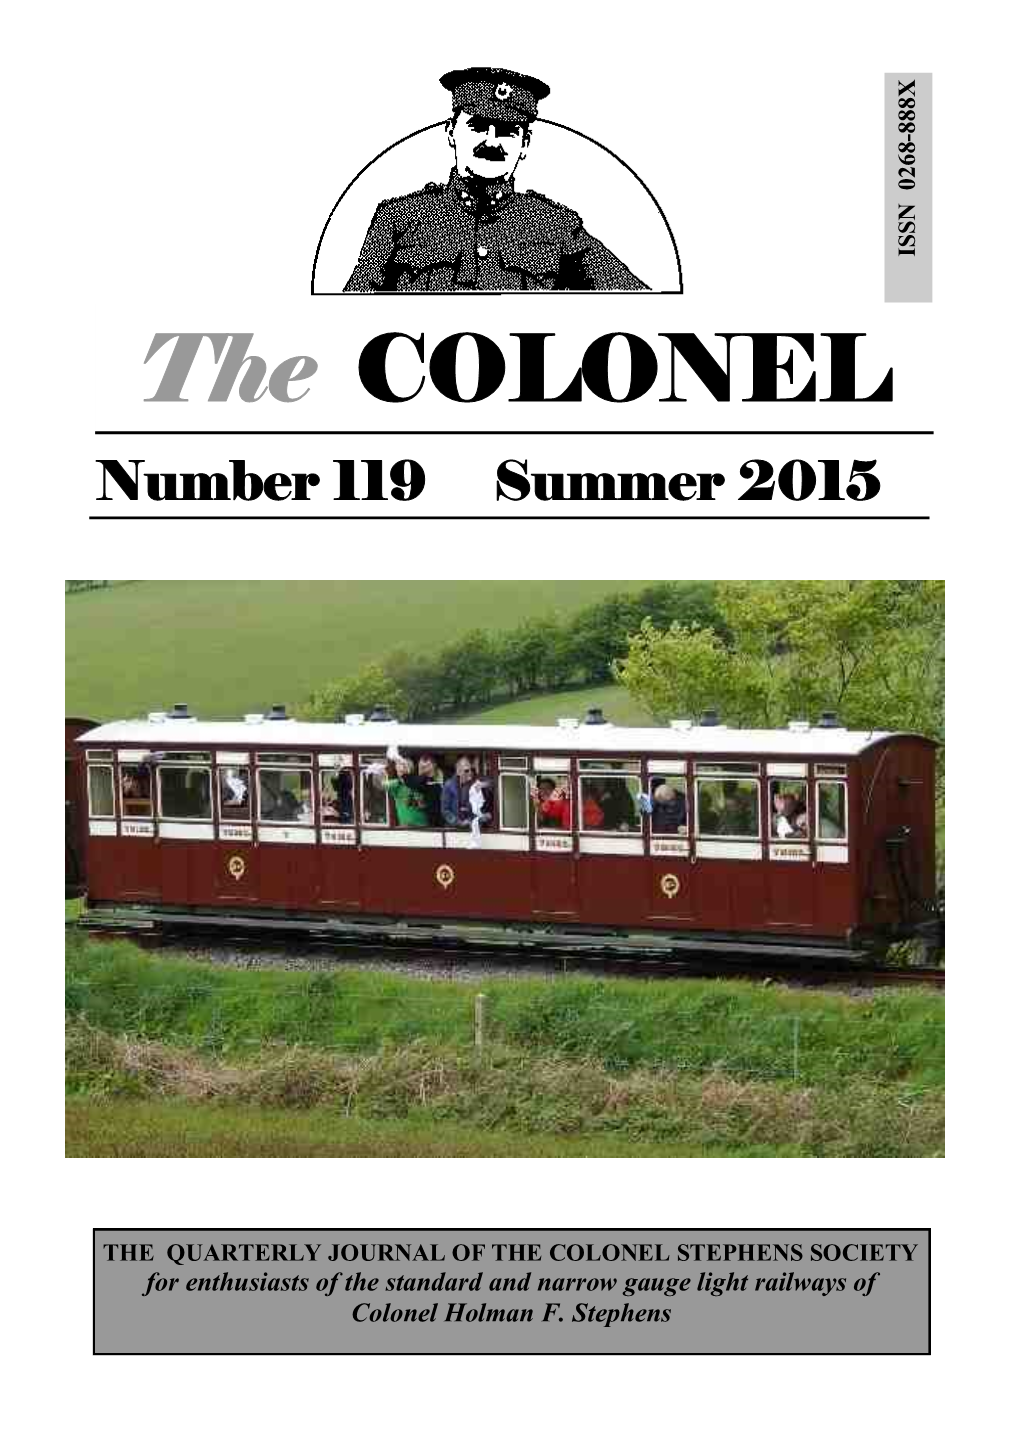 The COLONEL Number 119 Summer 2015